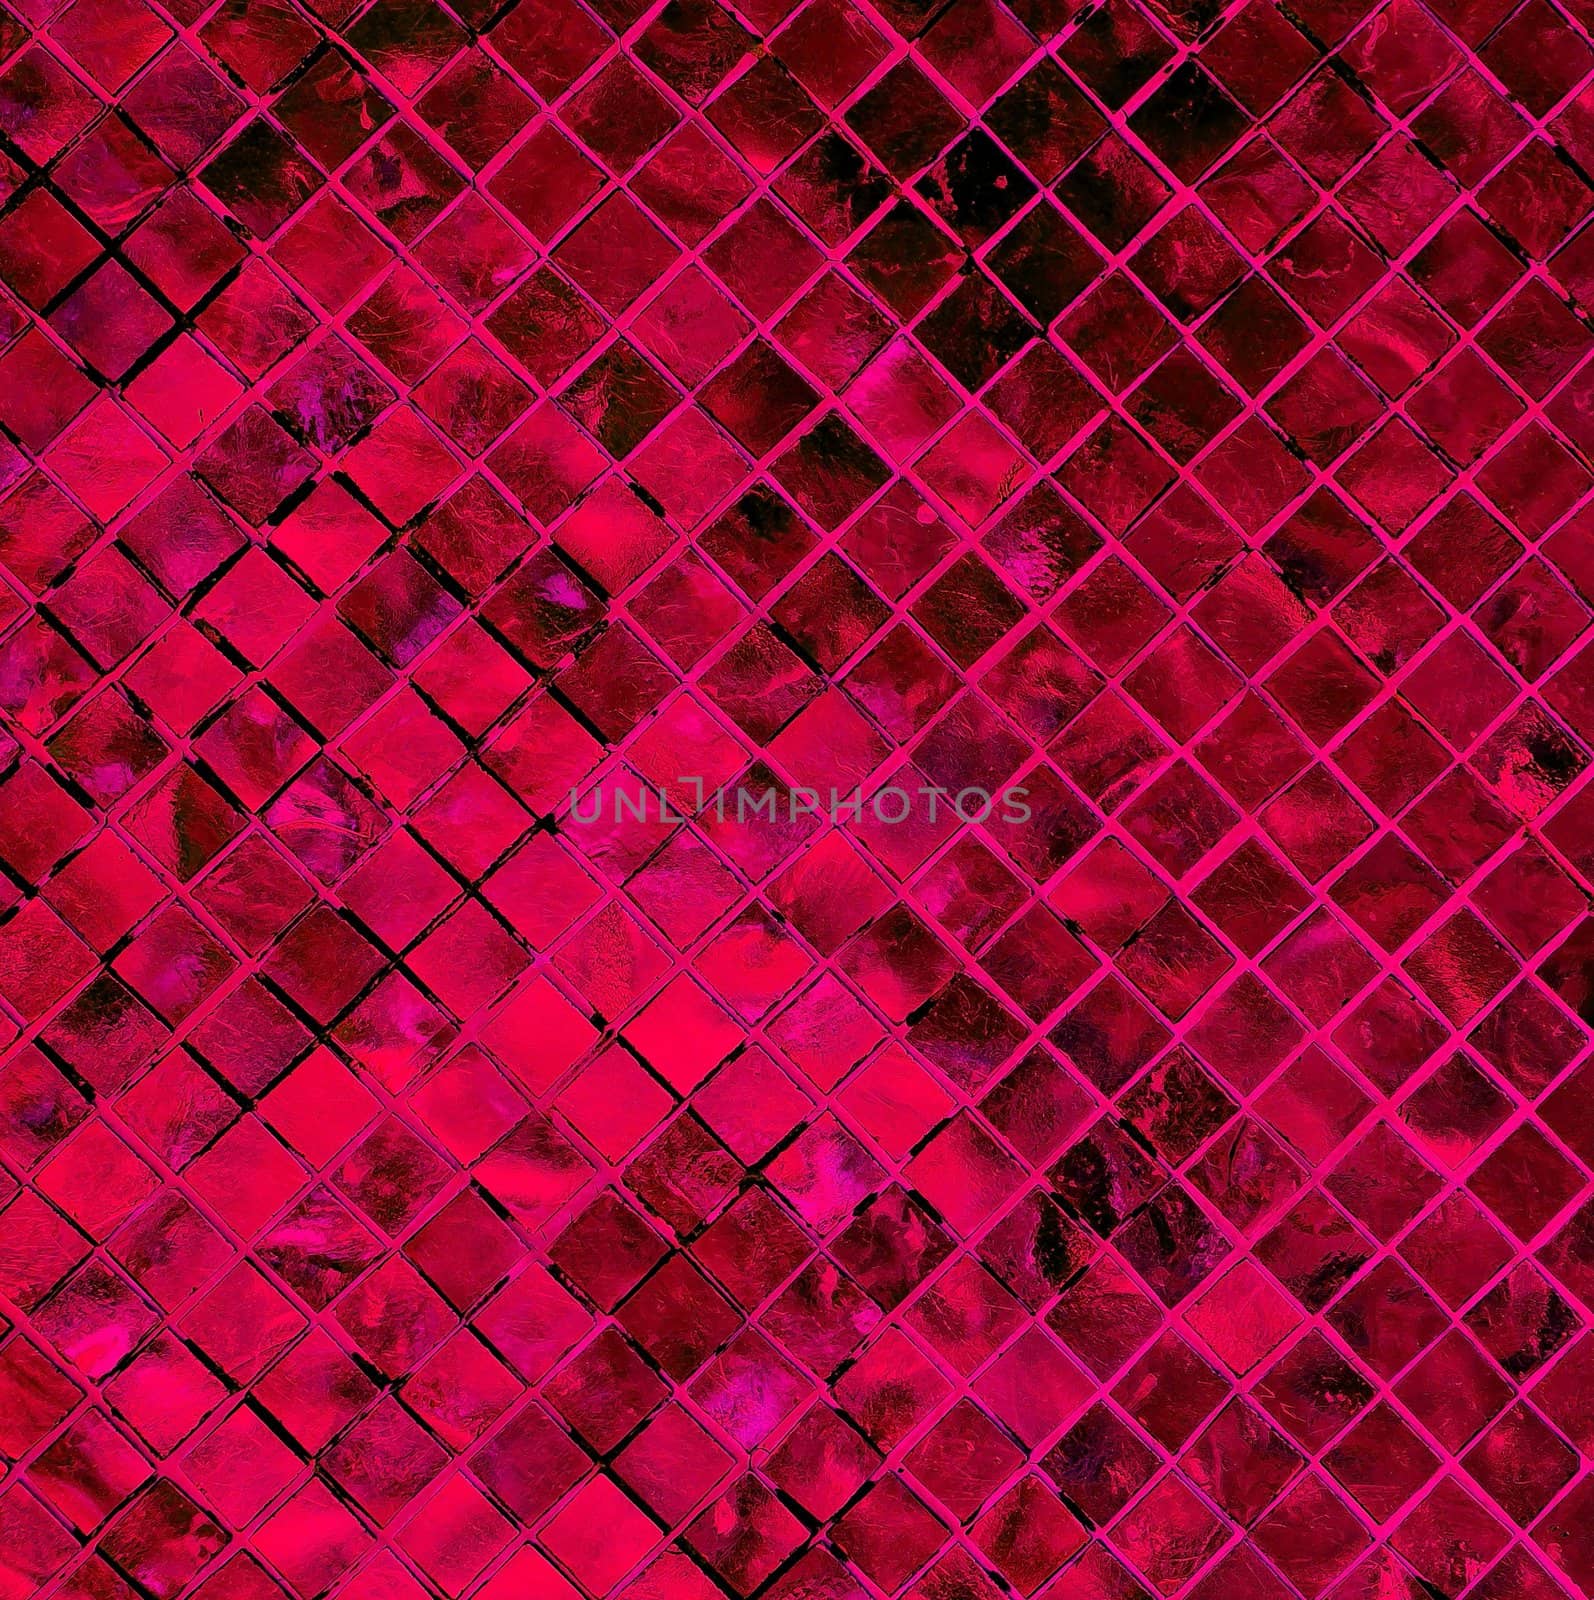 grunge pink tile background, abstract background